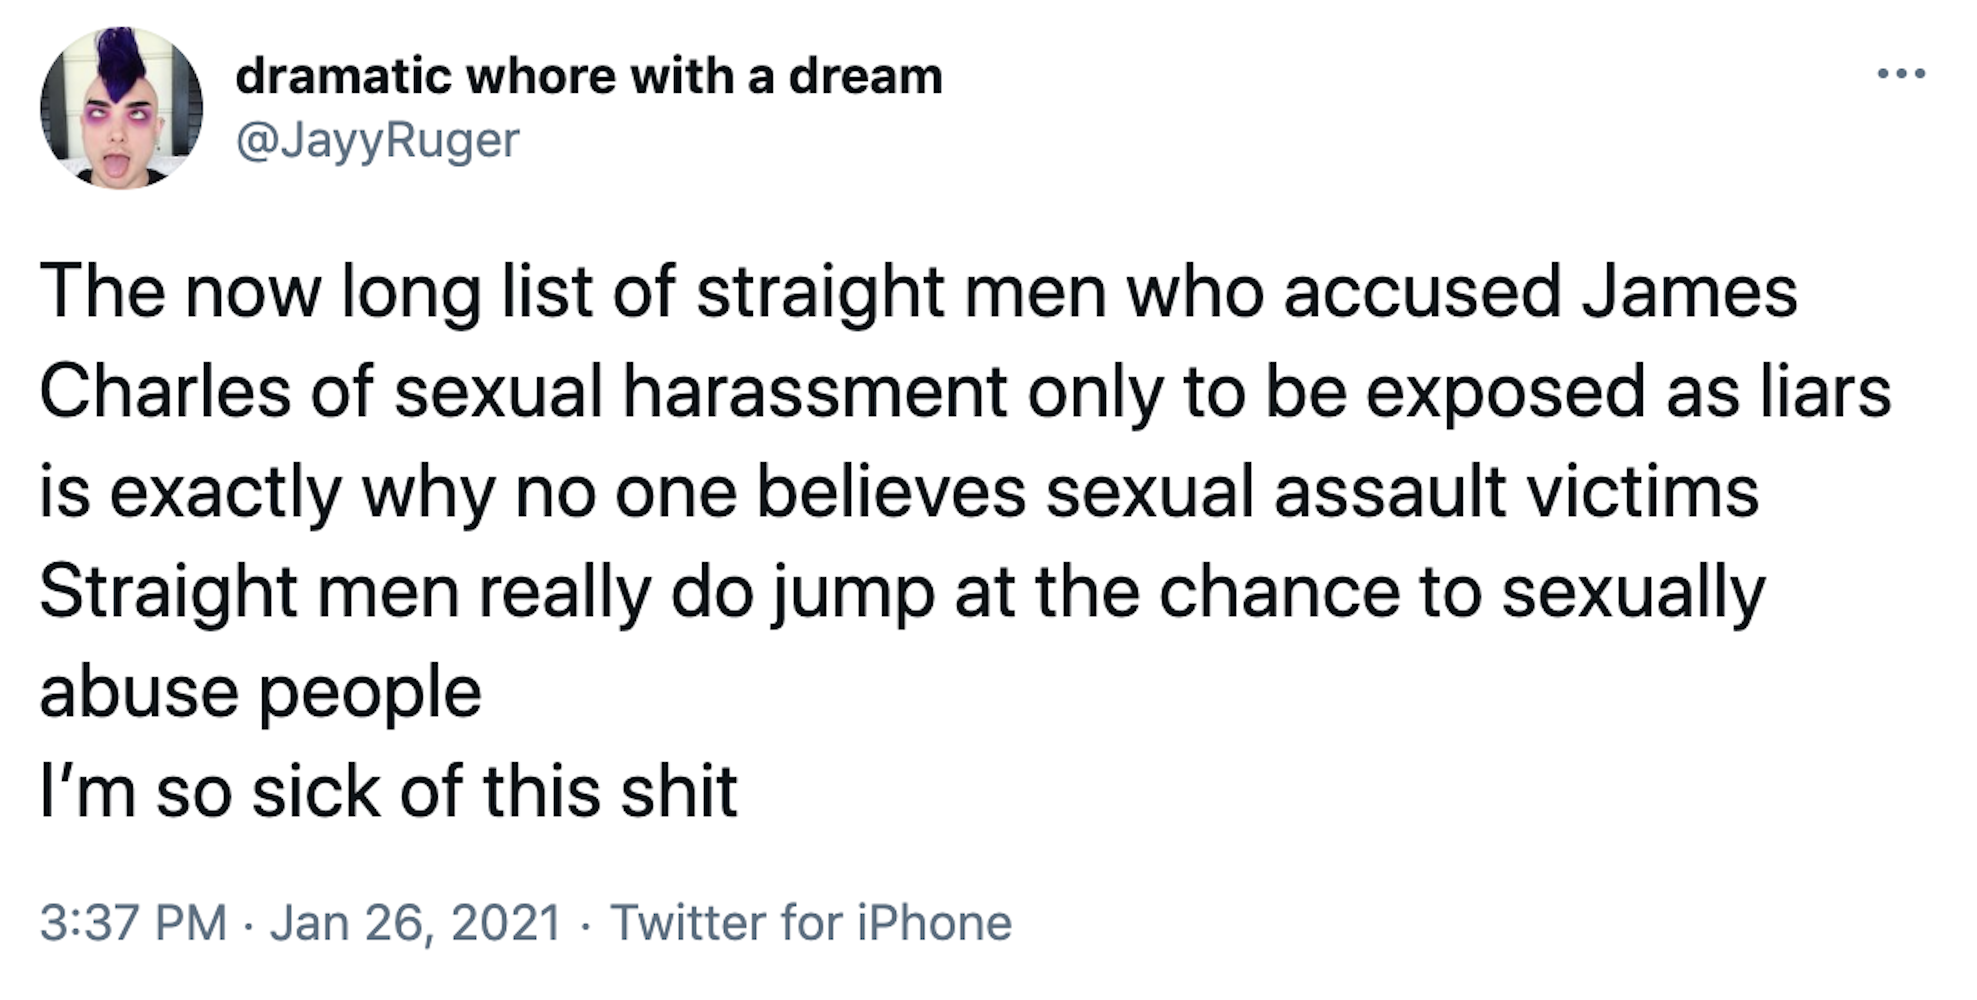 The now long list of straight men who accused James Charles of sexual harassment only to be exposed as liars is exactly why no one believes sexual assault victims Straight men really do jump at the chance to sexually abuse people I’m so sick of this shit